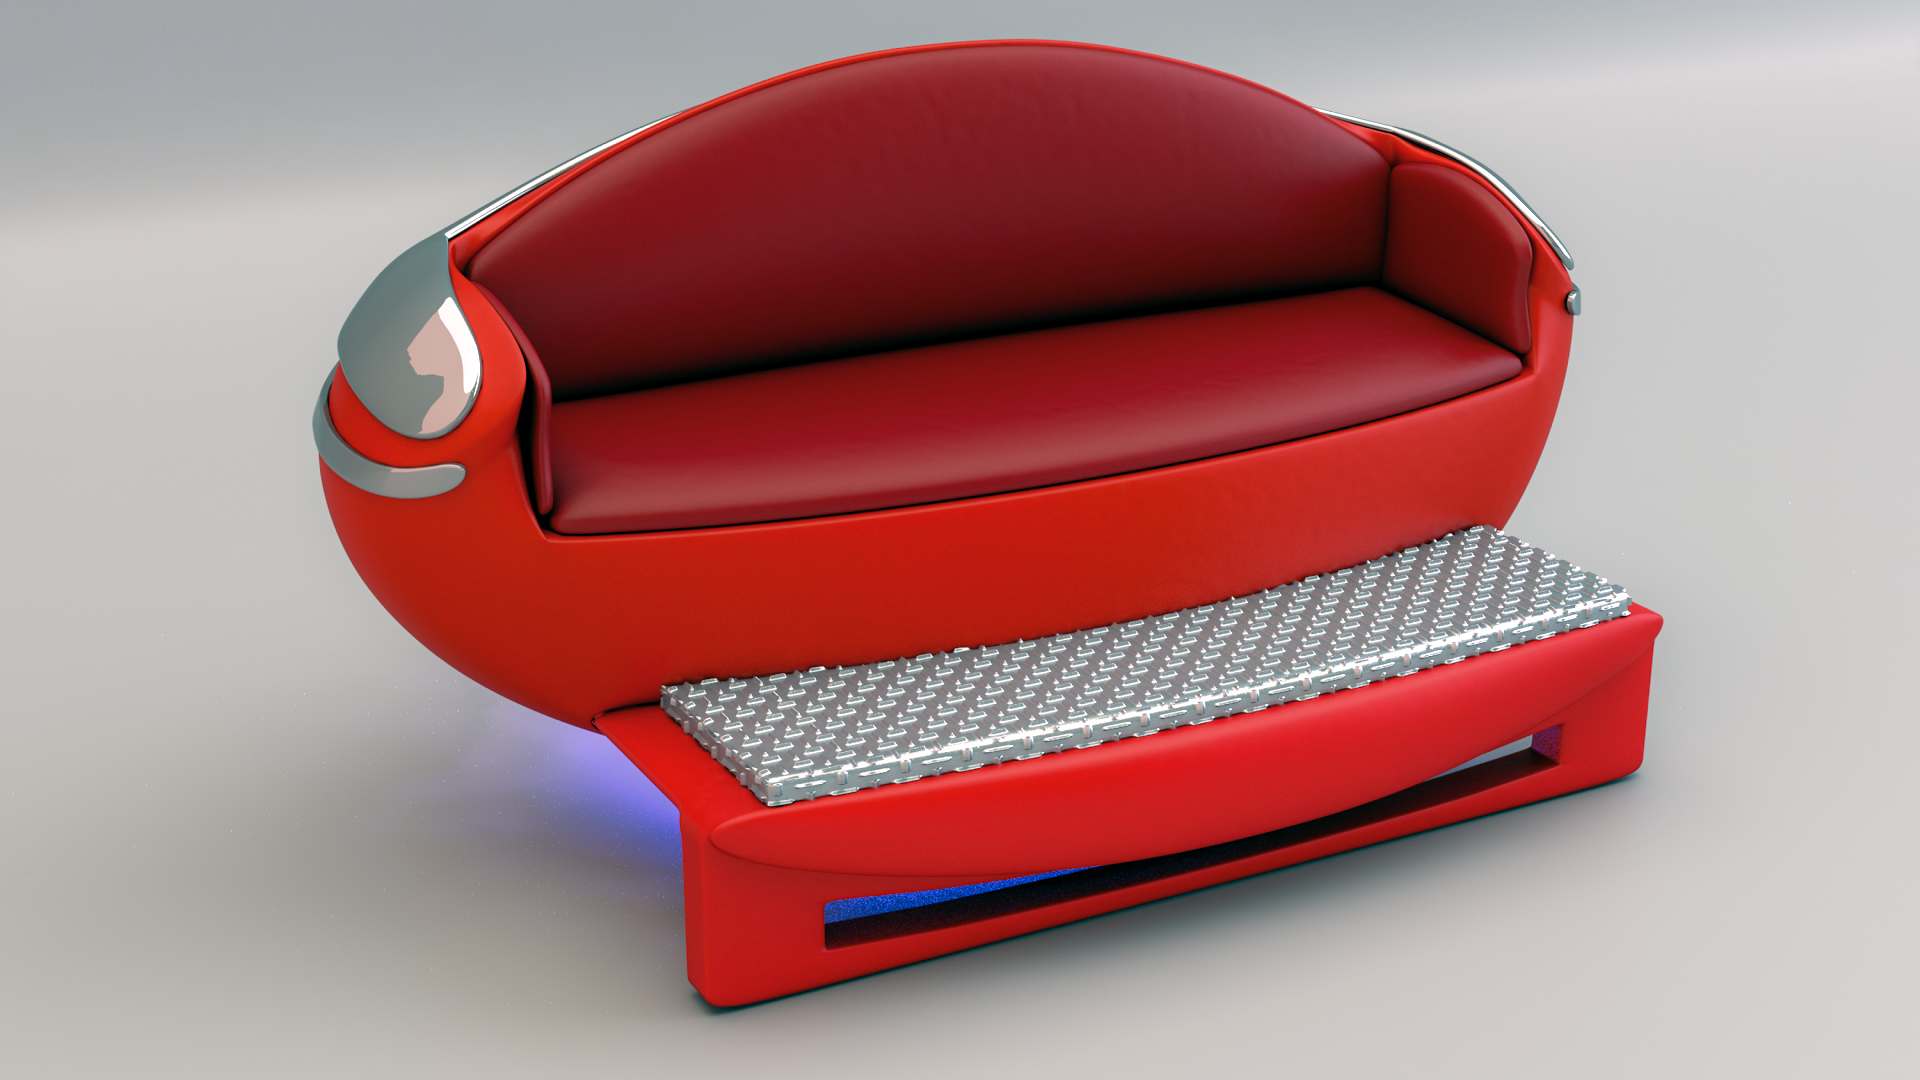 industrialdesign14 Industrial Design Modeled and Rendered in Modo by Mike Grauer